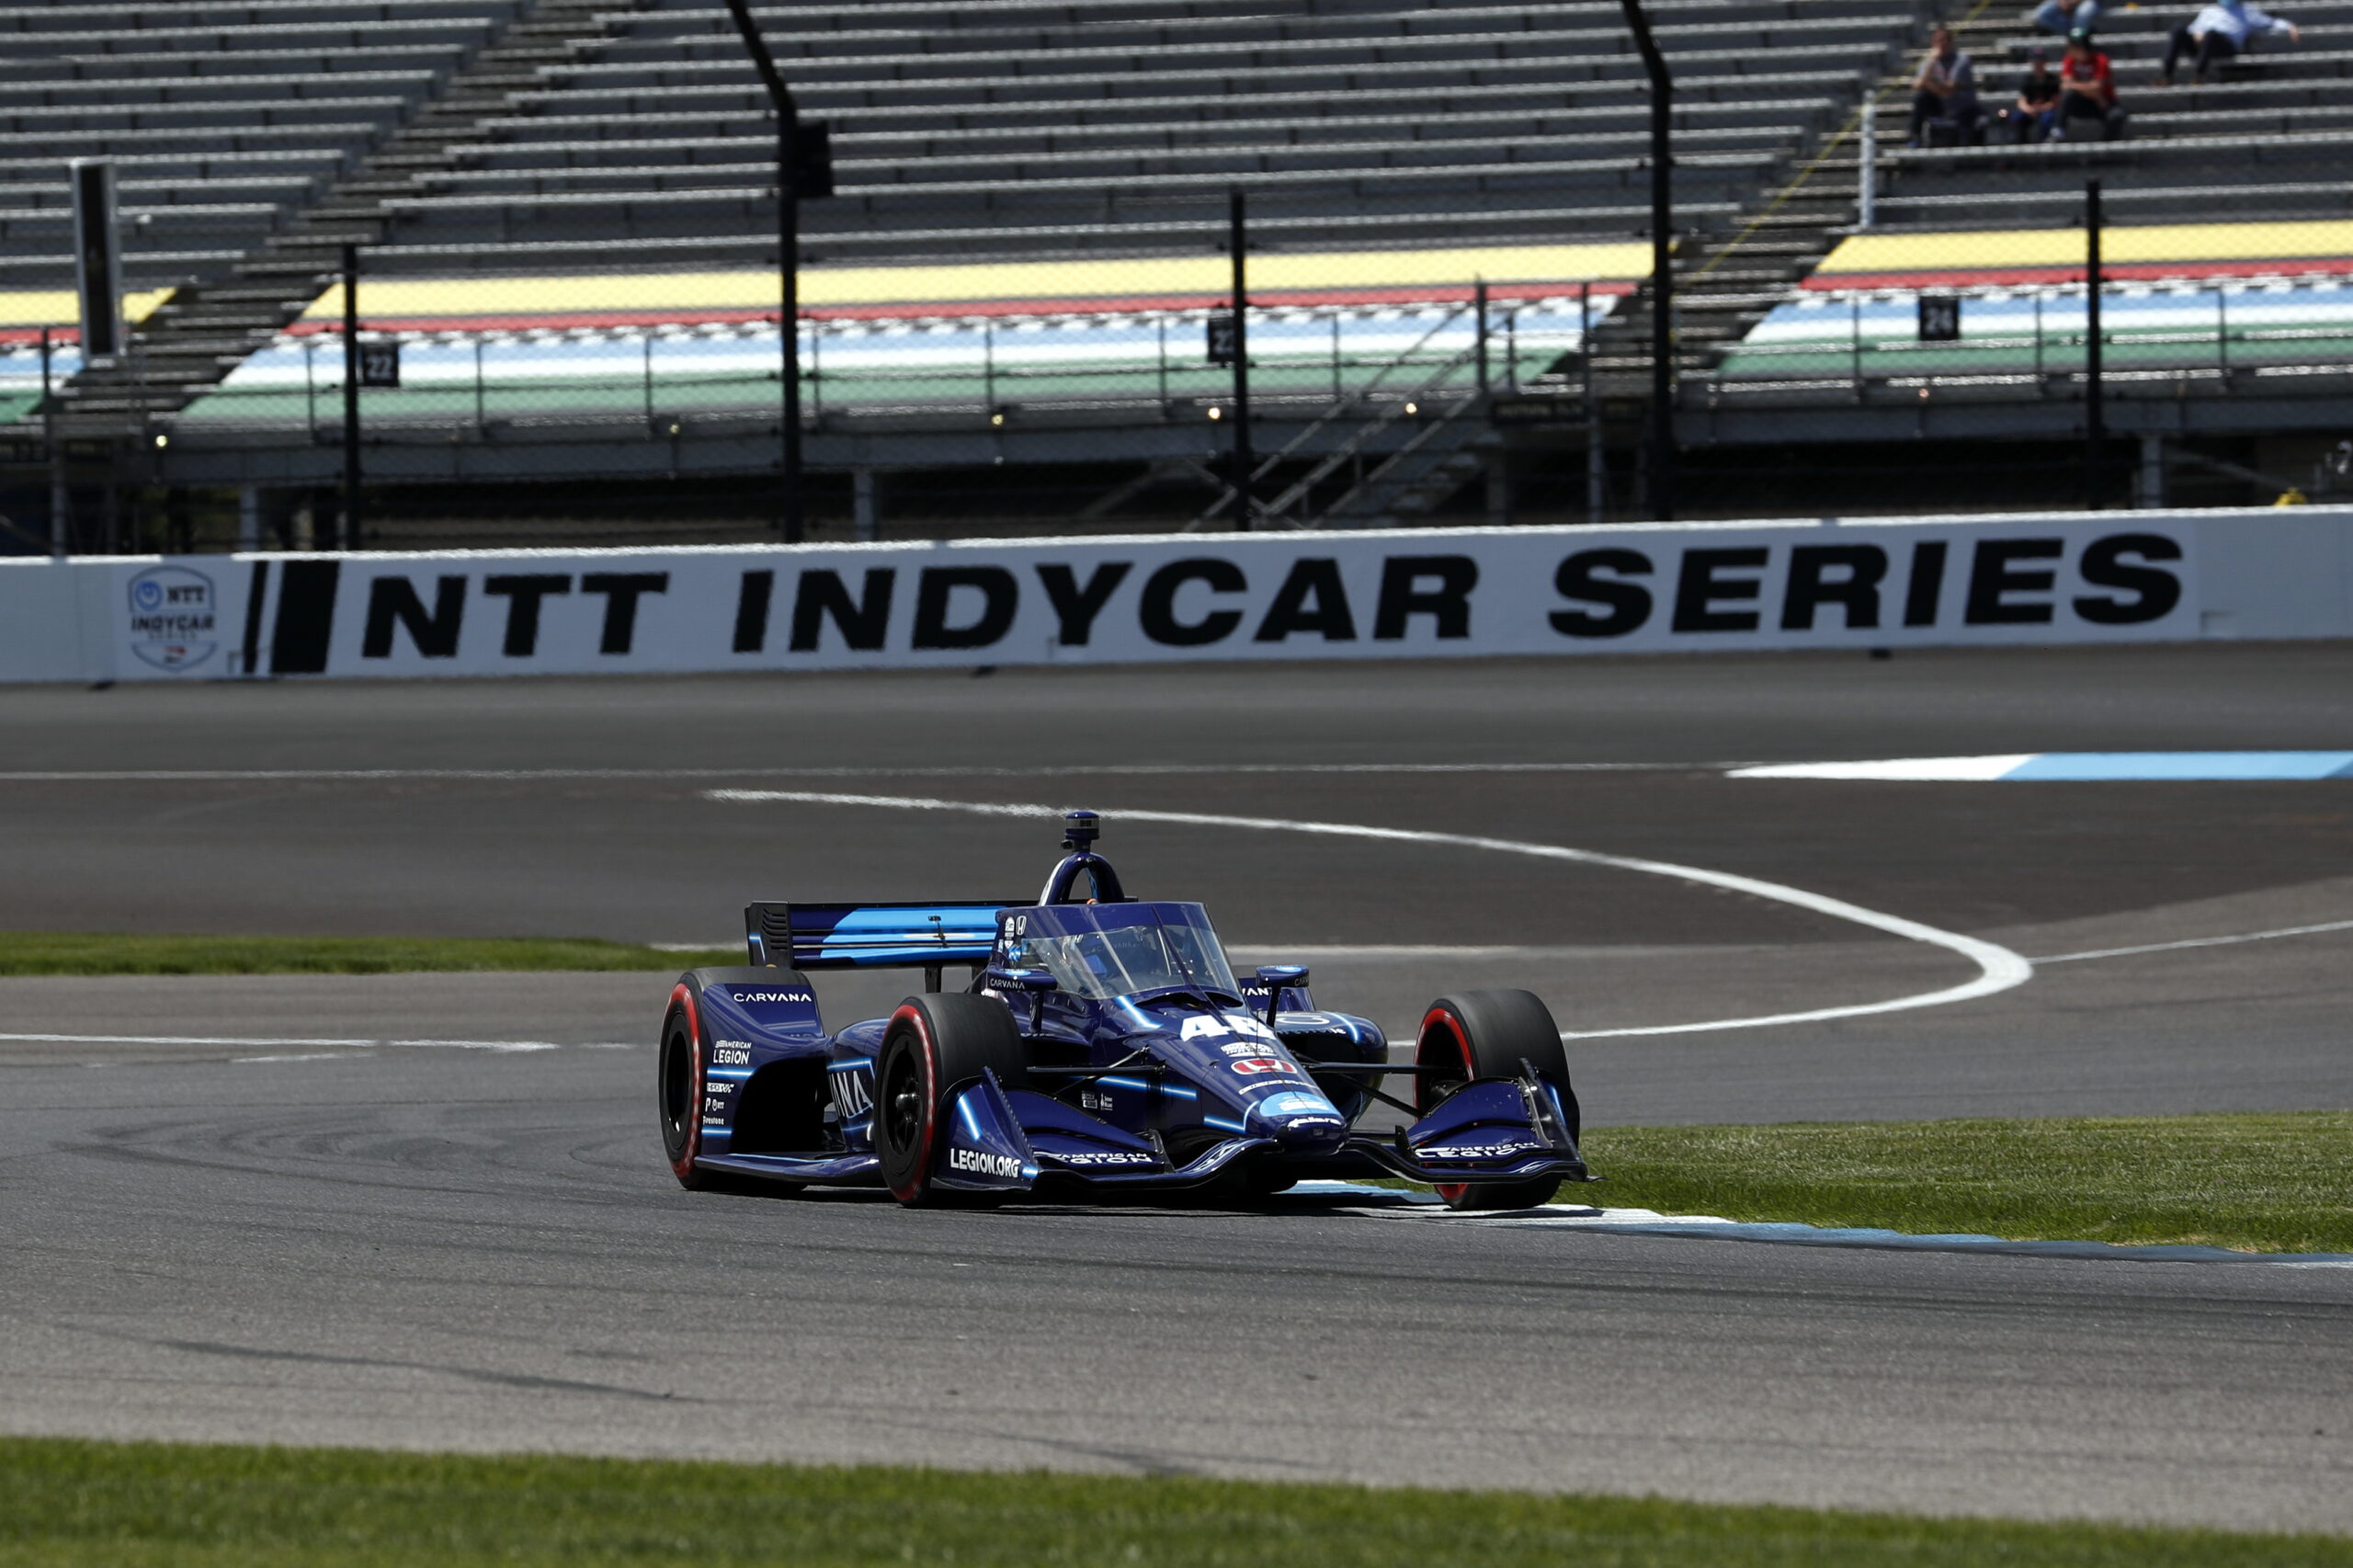 As can be seen, Johnson's fan designed paint scheme looked sleek at Indianapolis. (Photo: Chris Jones/INDYCAR)